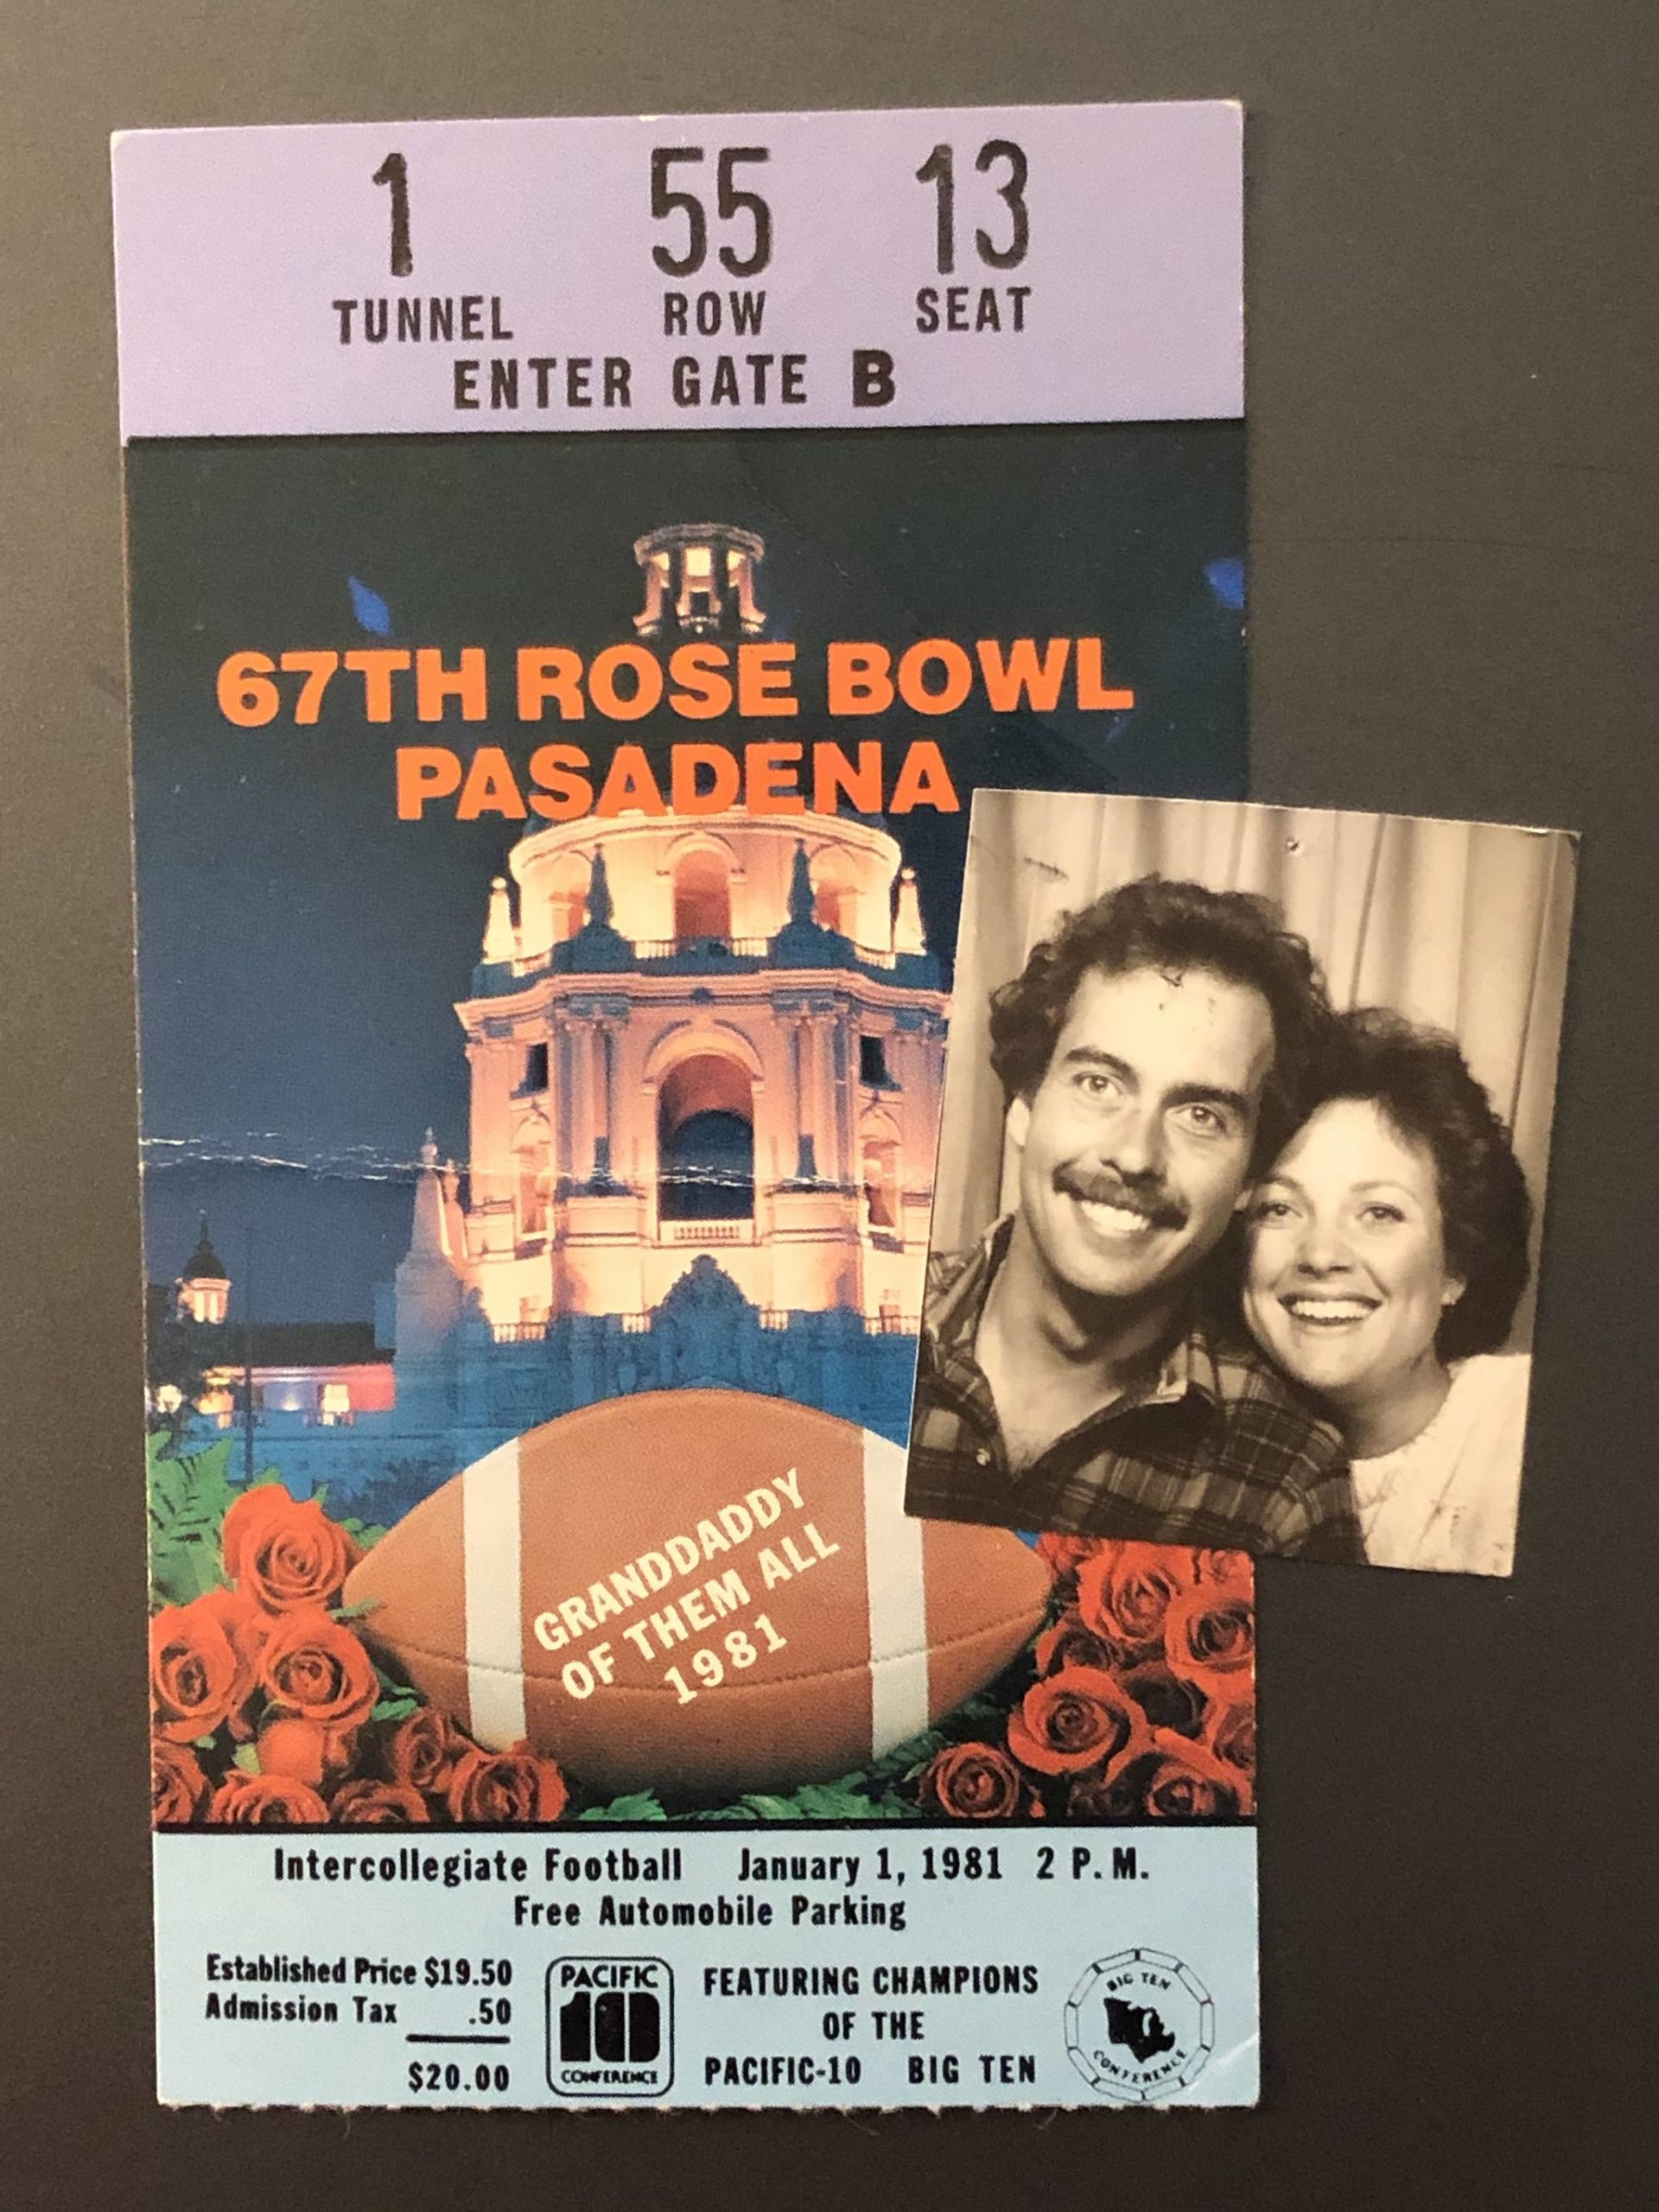 Guest columnist Greg Asimakoupoulos took his future wife, Wendy, to the Rose Bowl game between Washington and Michigan. Courtesy photo